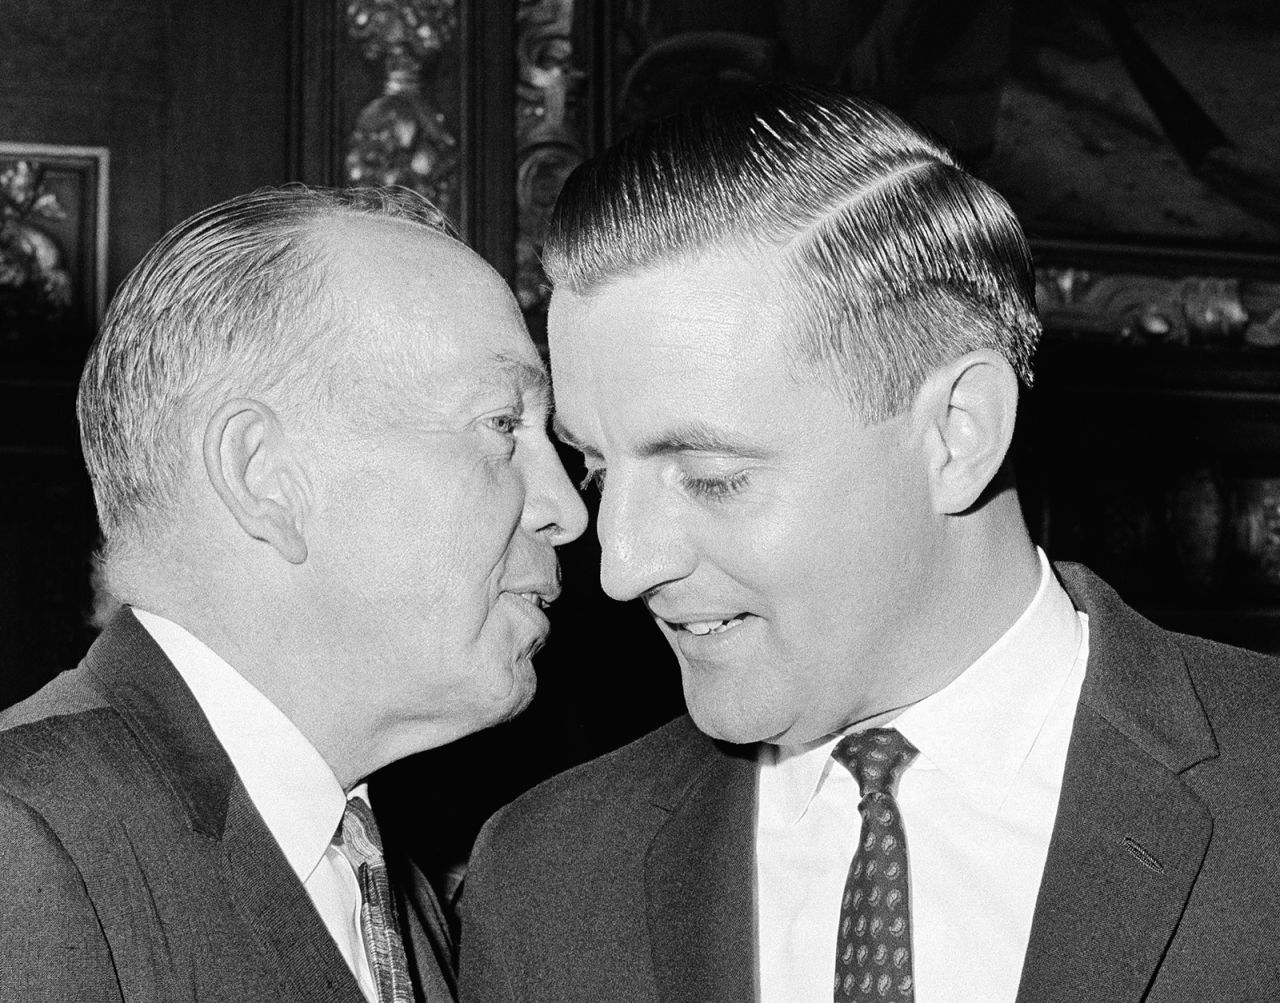 Mondale smiles while speaking to Minnesota Gov. Karl Rolvaag on November 17, 1964. Rolvaag appointed Mondale to the US Senate after Hubert H. Humphrey was elected vice president.